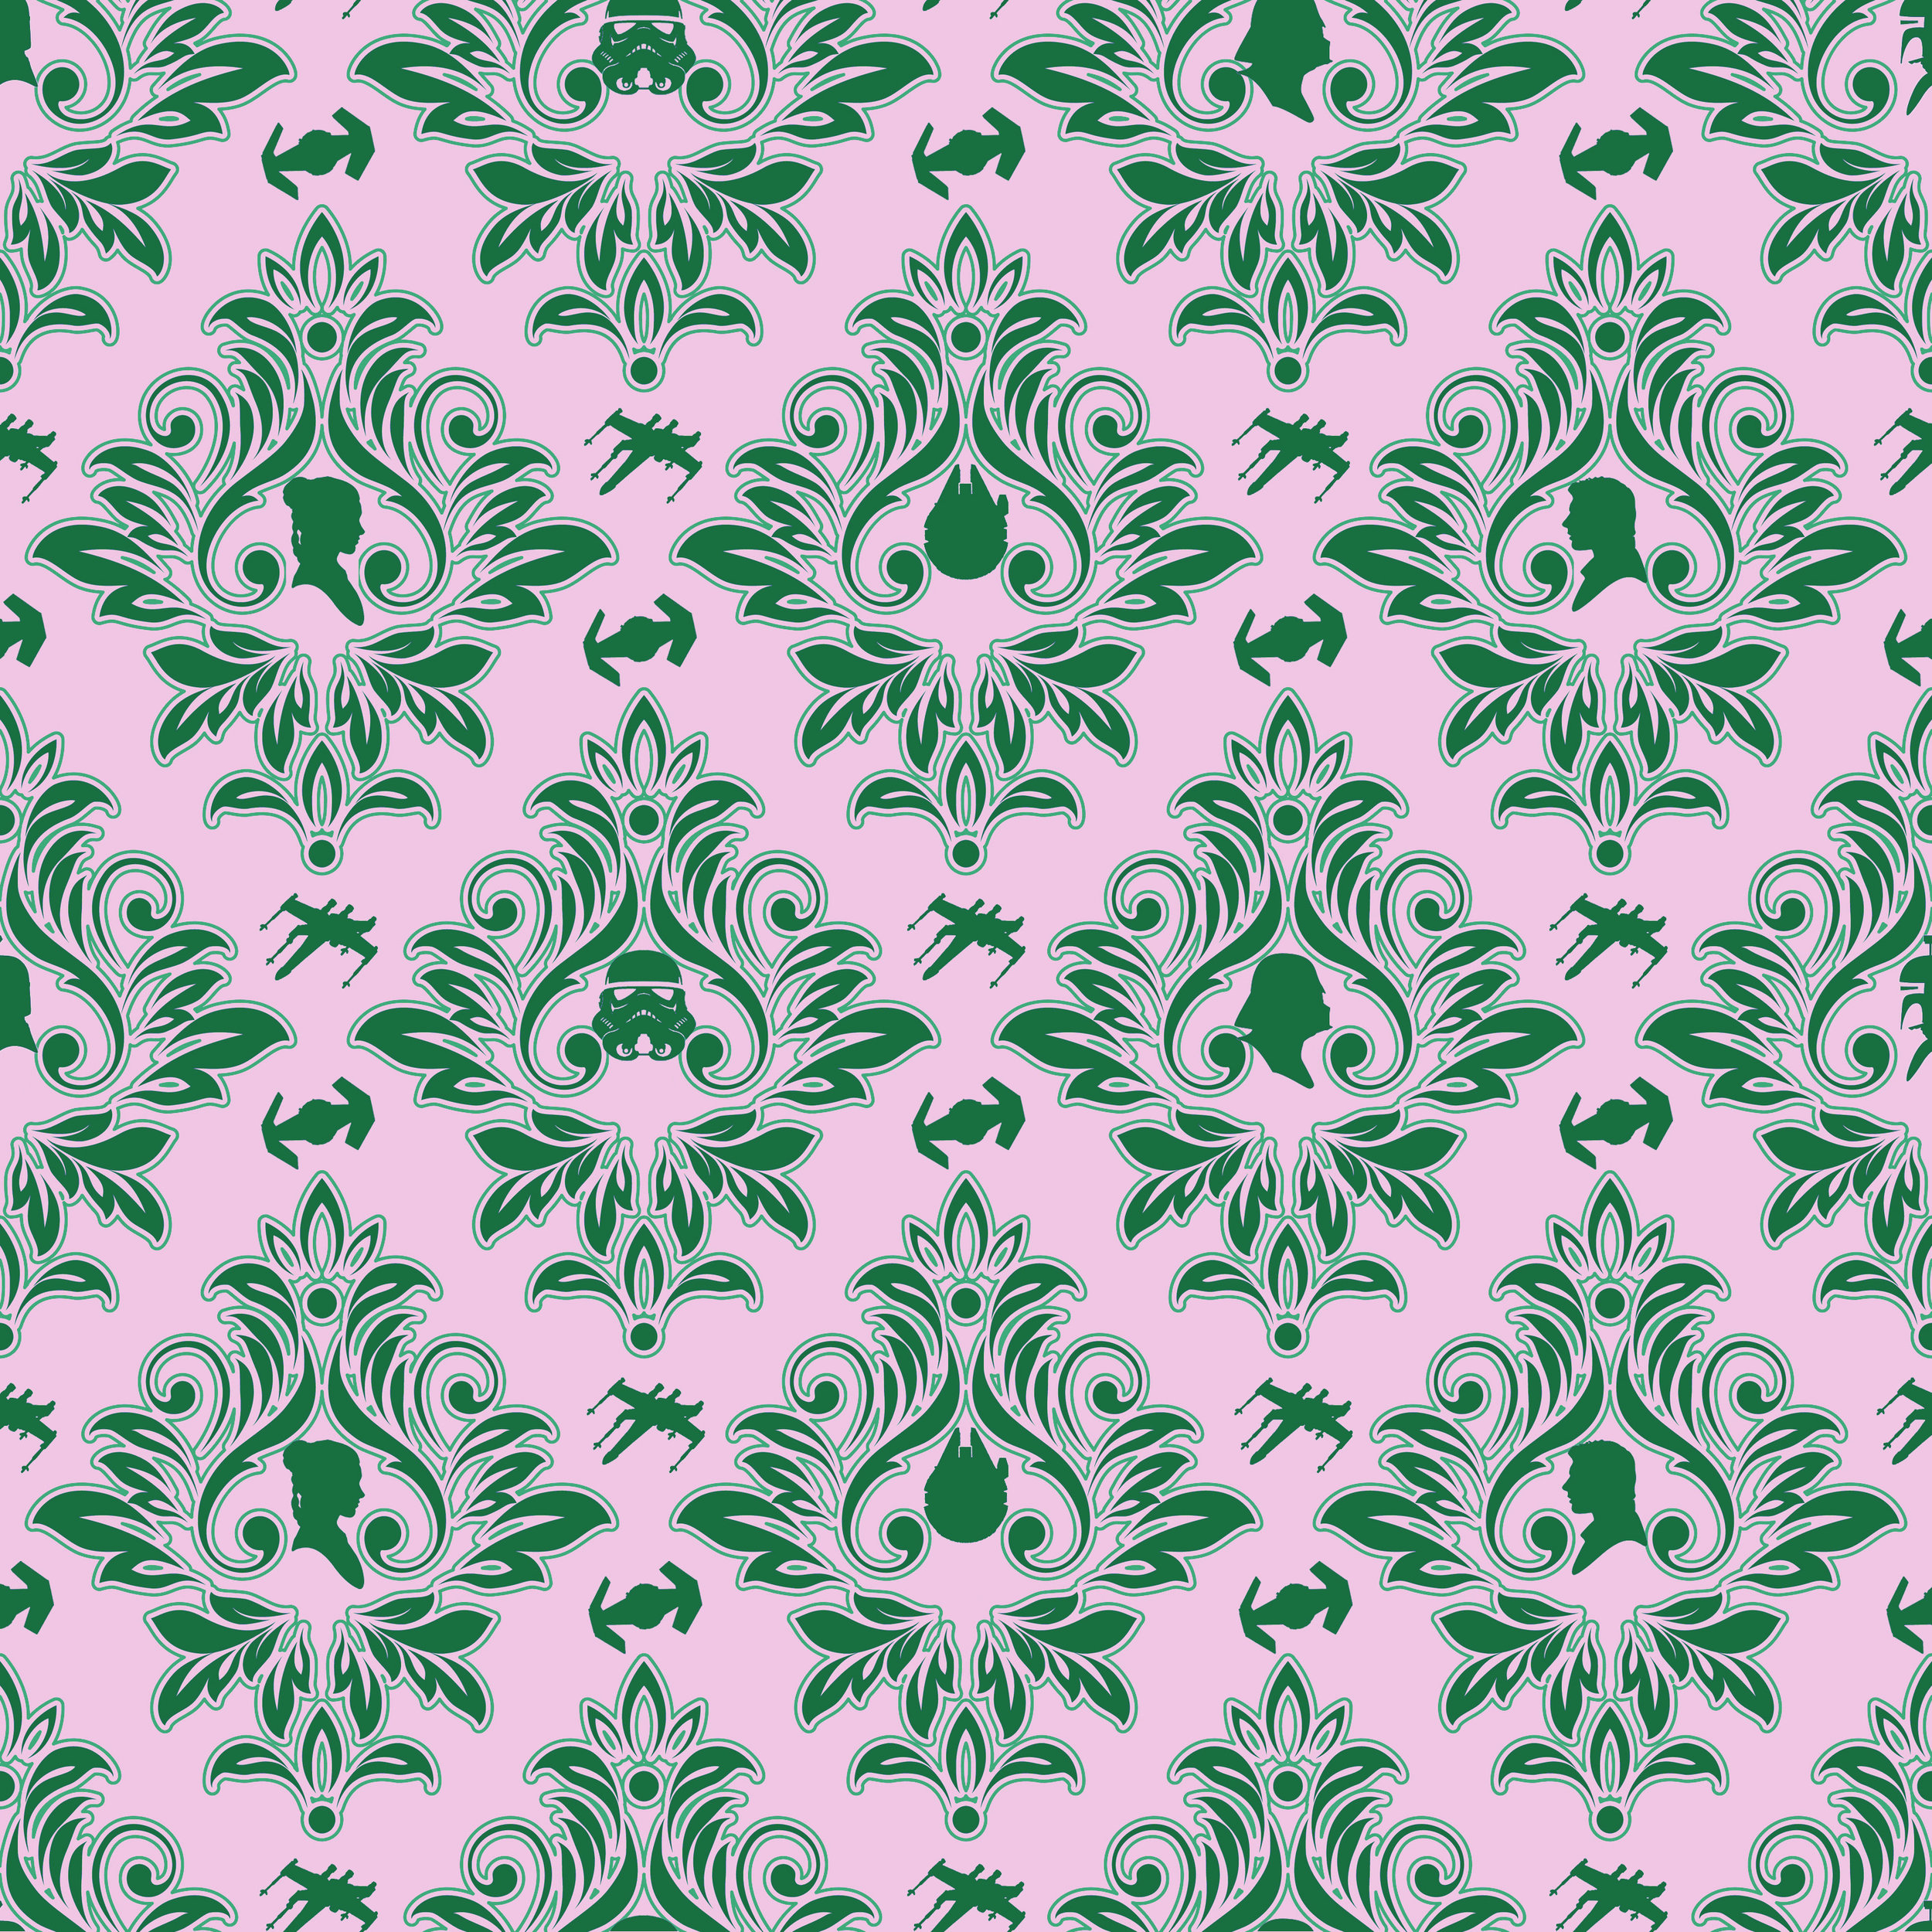 Star Wars damask pink and green